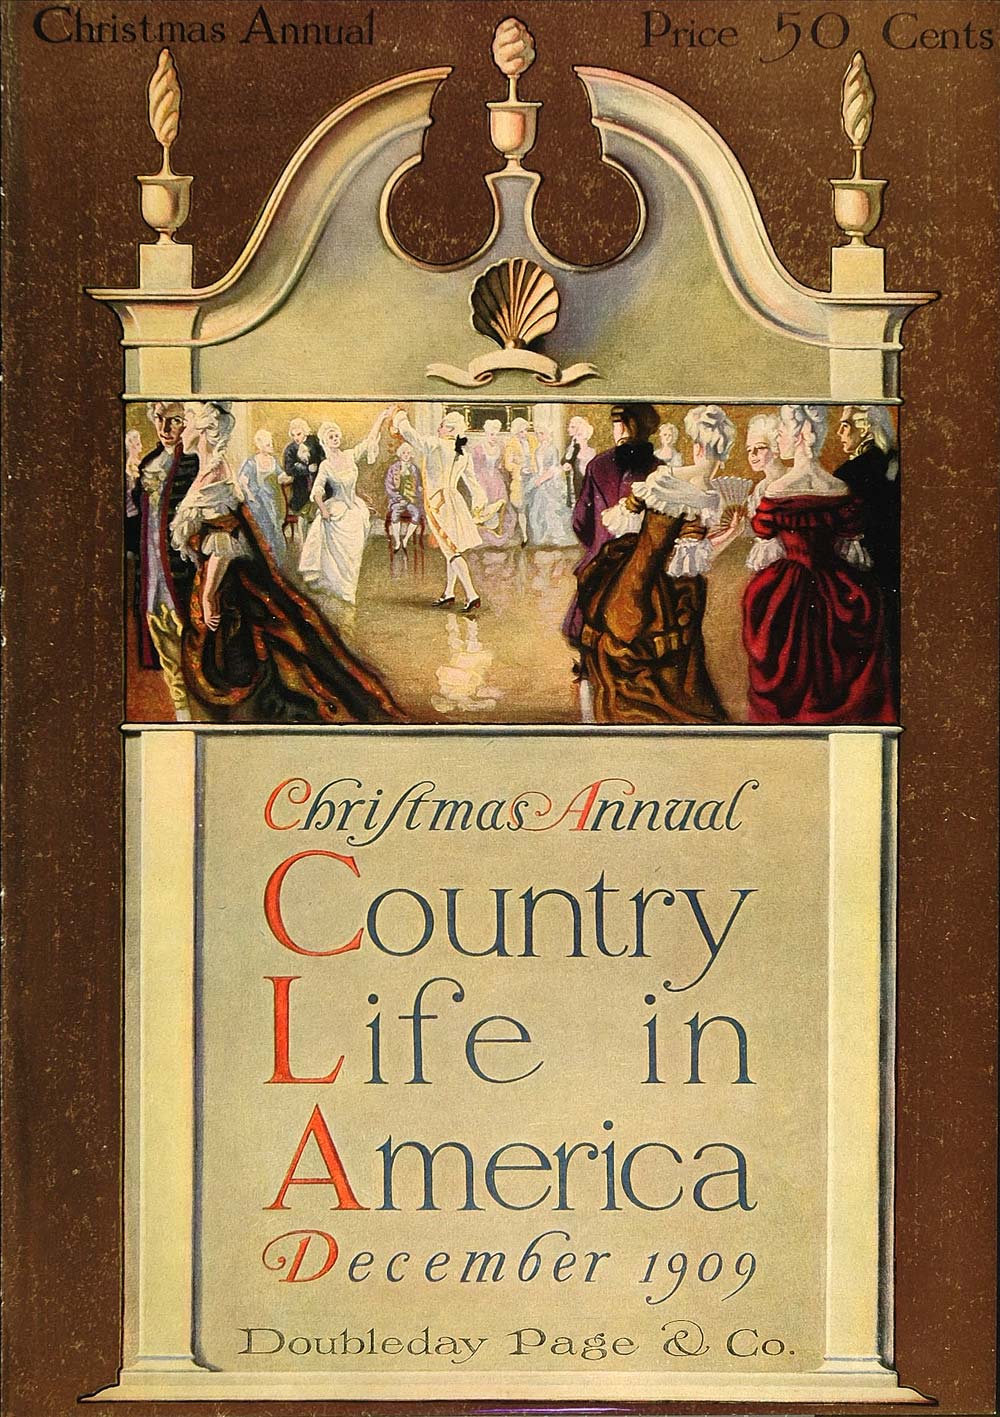 1909 Country Life in America COVER Dec. Christmas Dance - ORIGINAL CL2